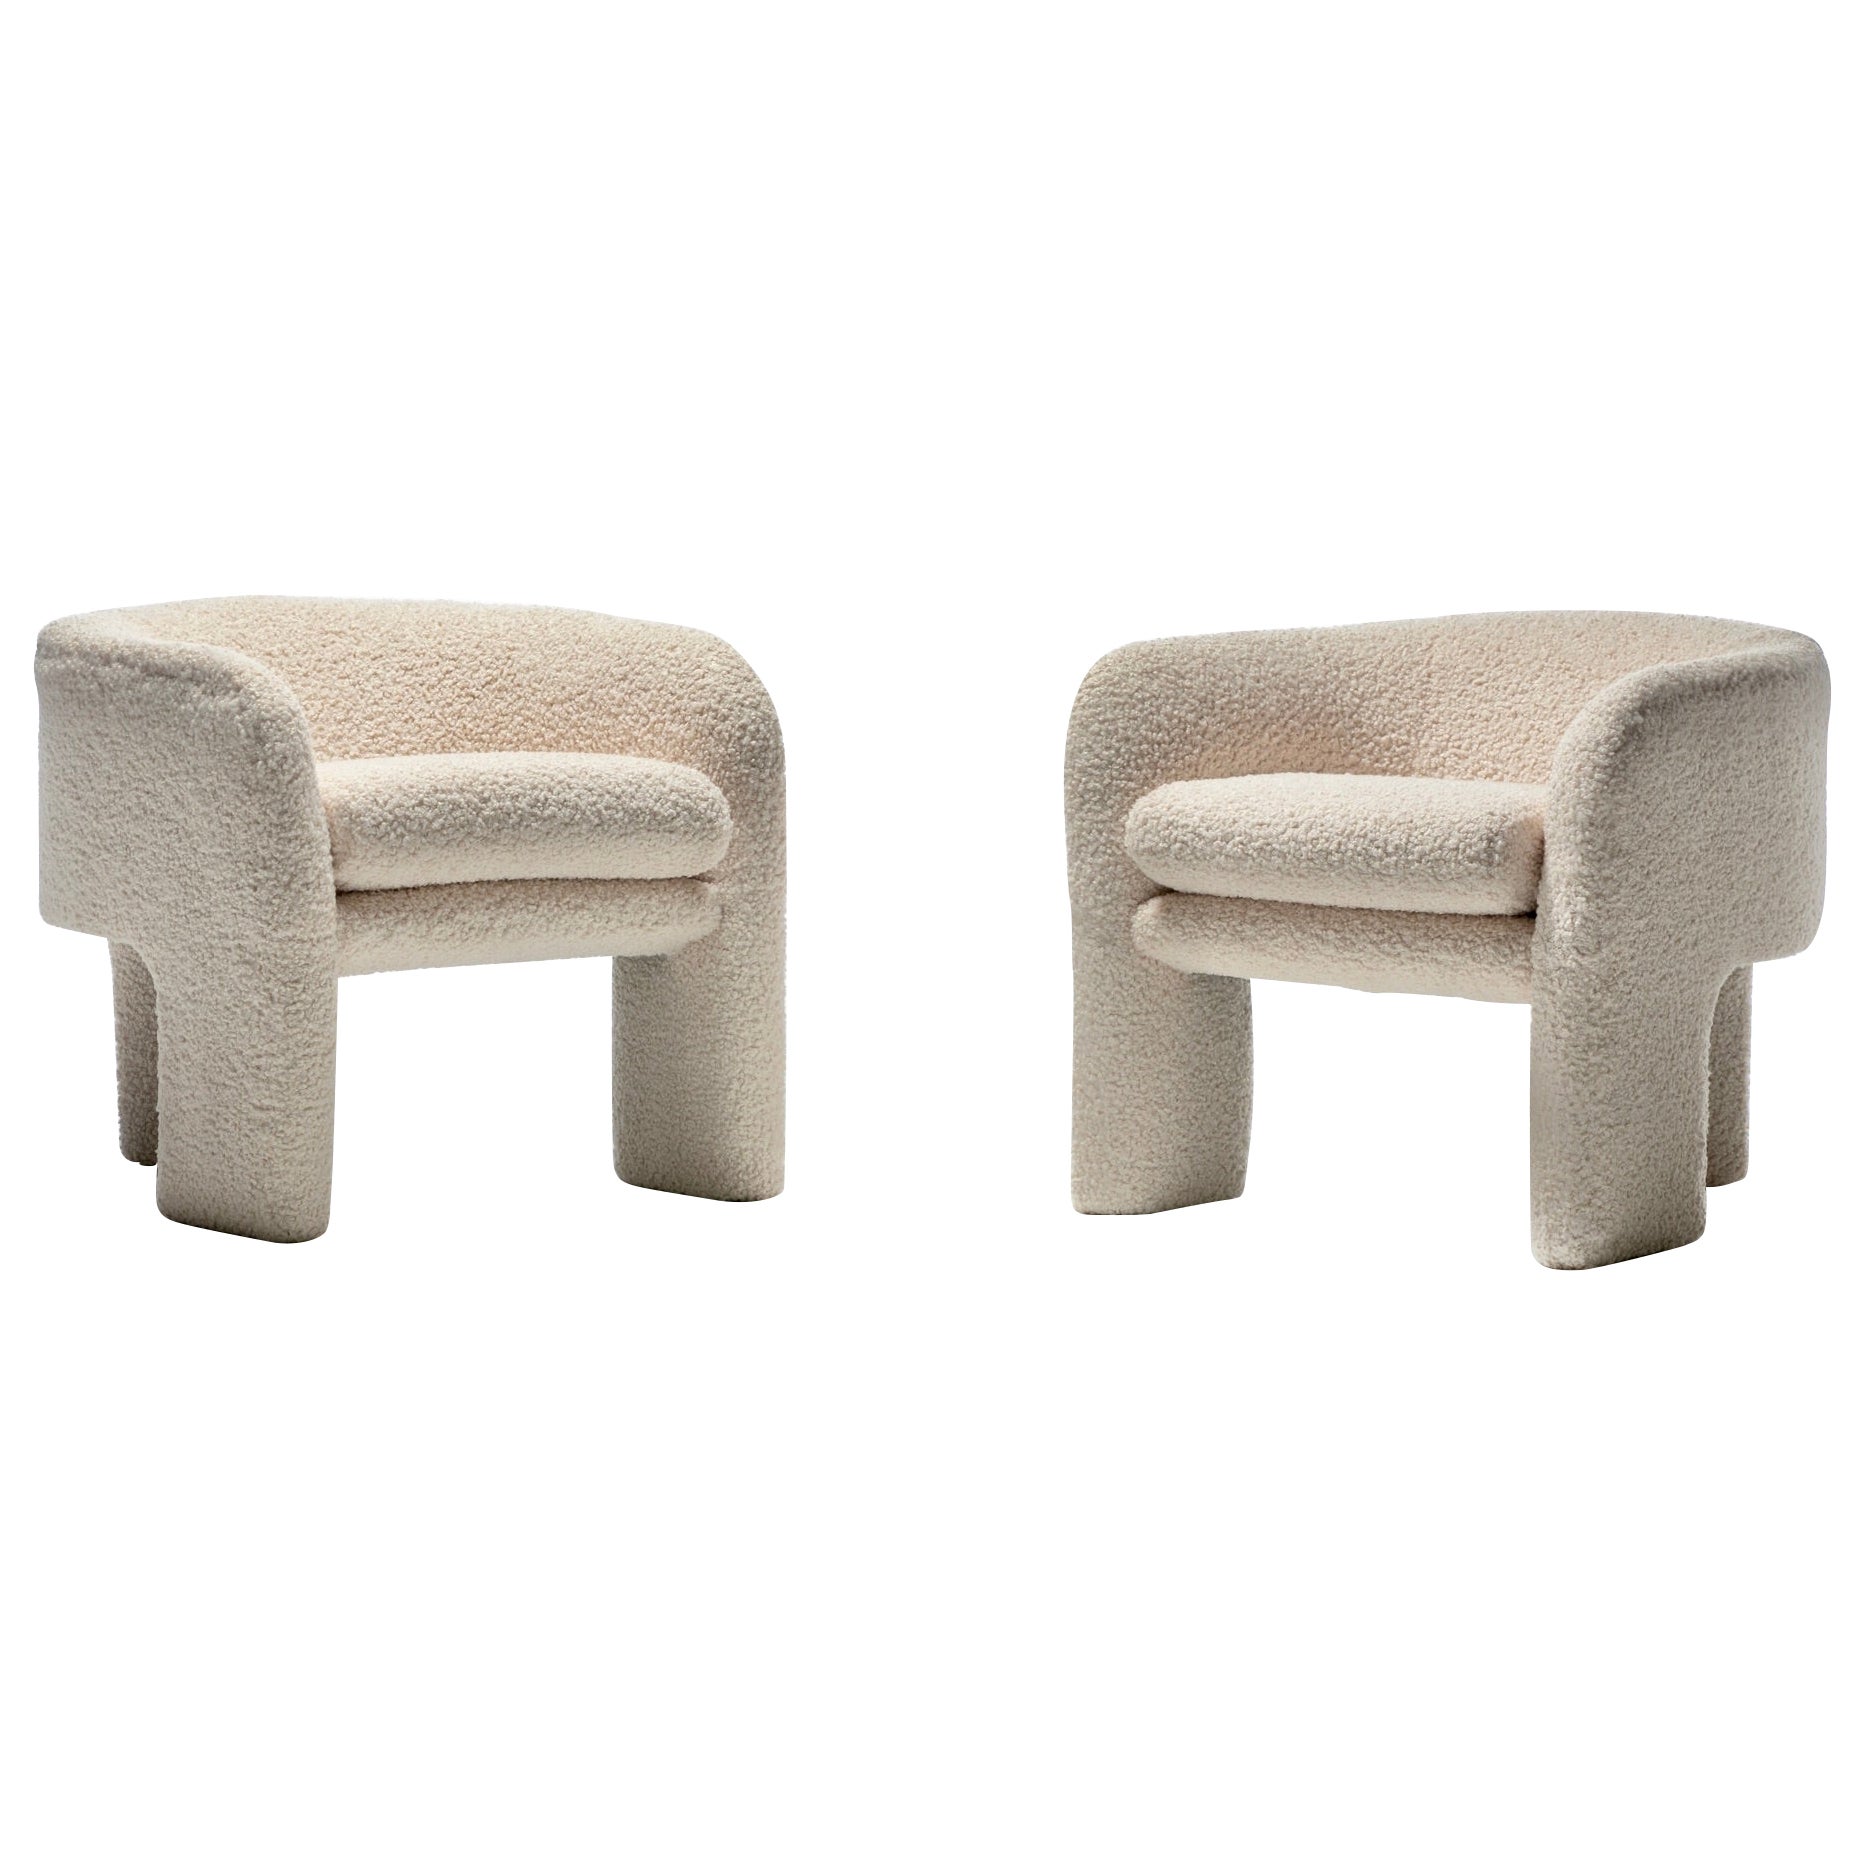 Pair of Preview Tri Leg Post Modern Armchairs Newly Upholstered in Ivory Bouclé 